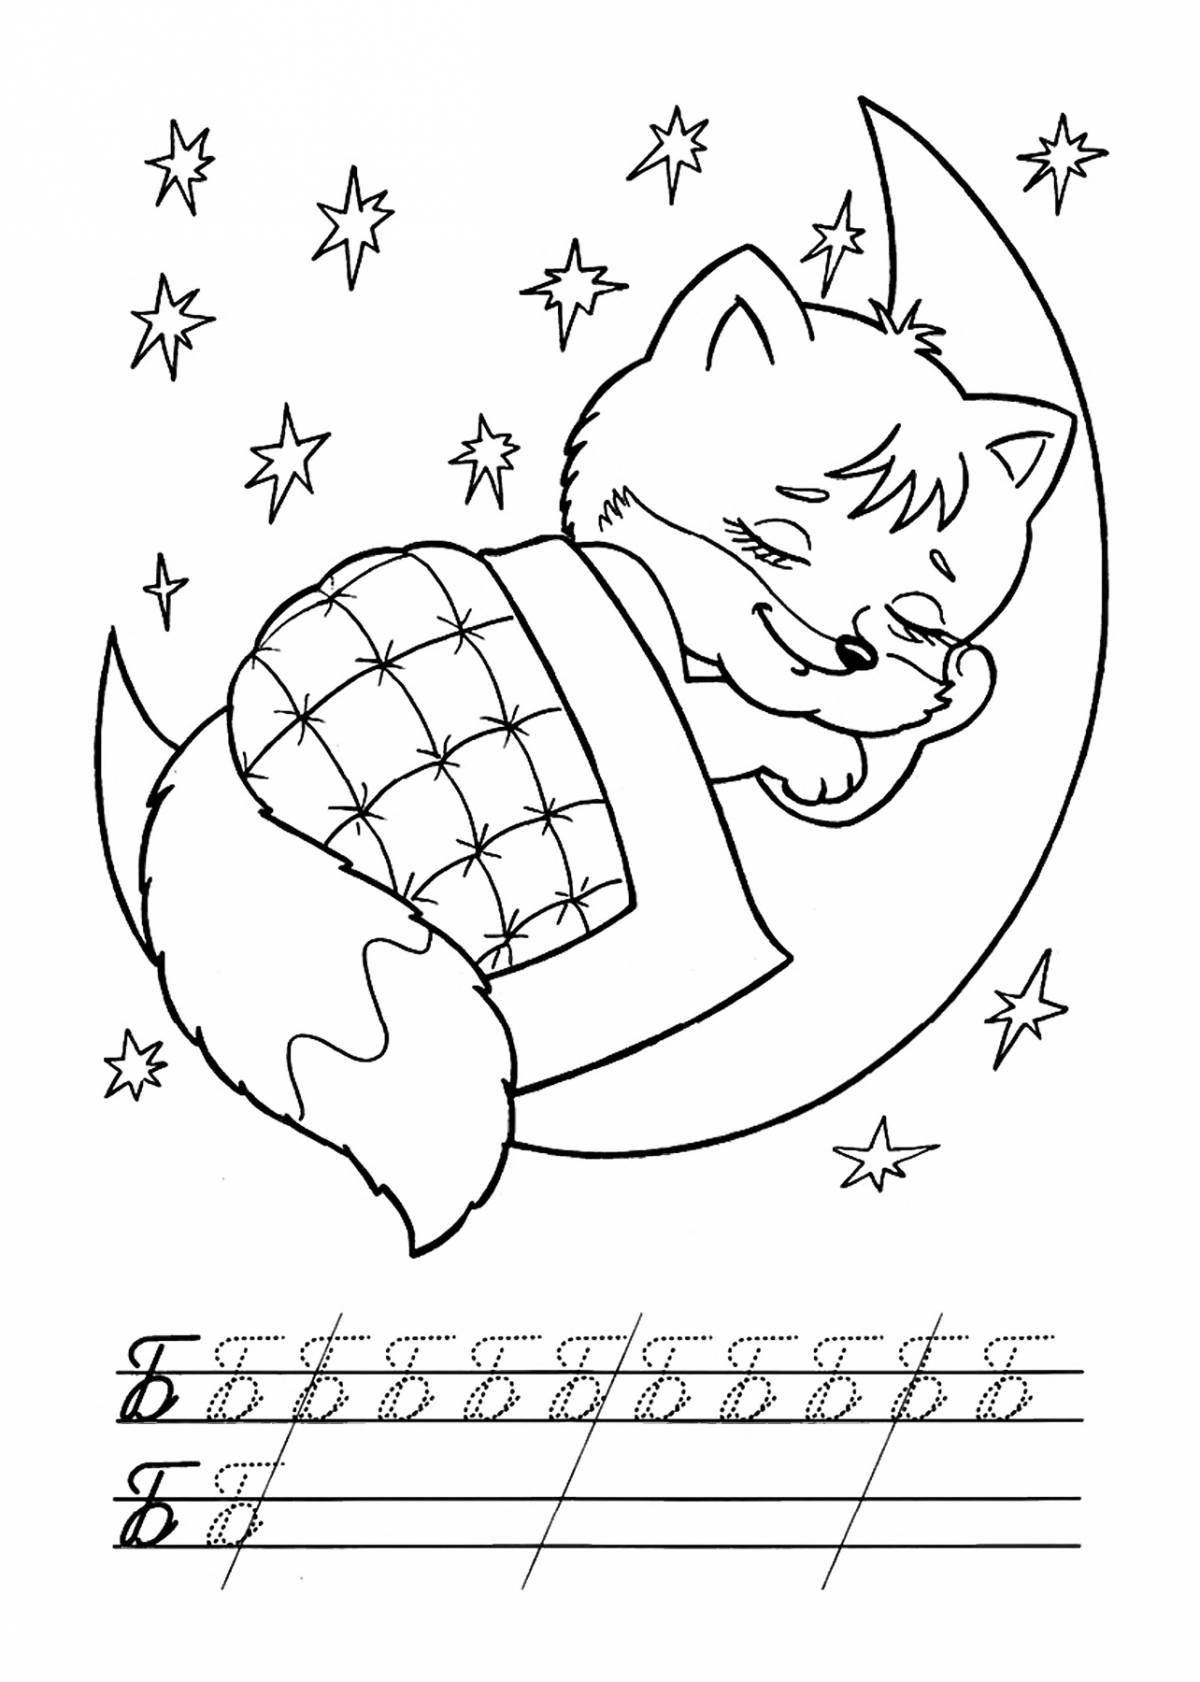 Adorable tails coloring page